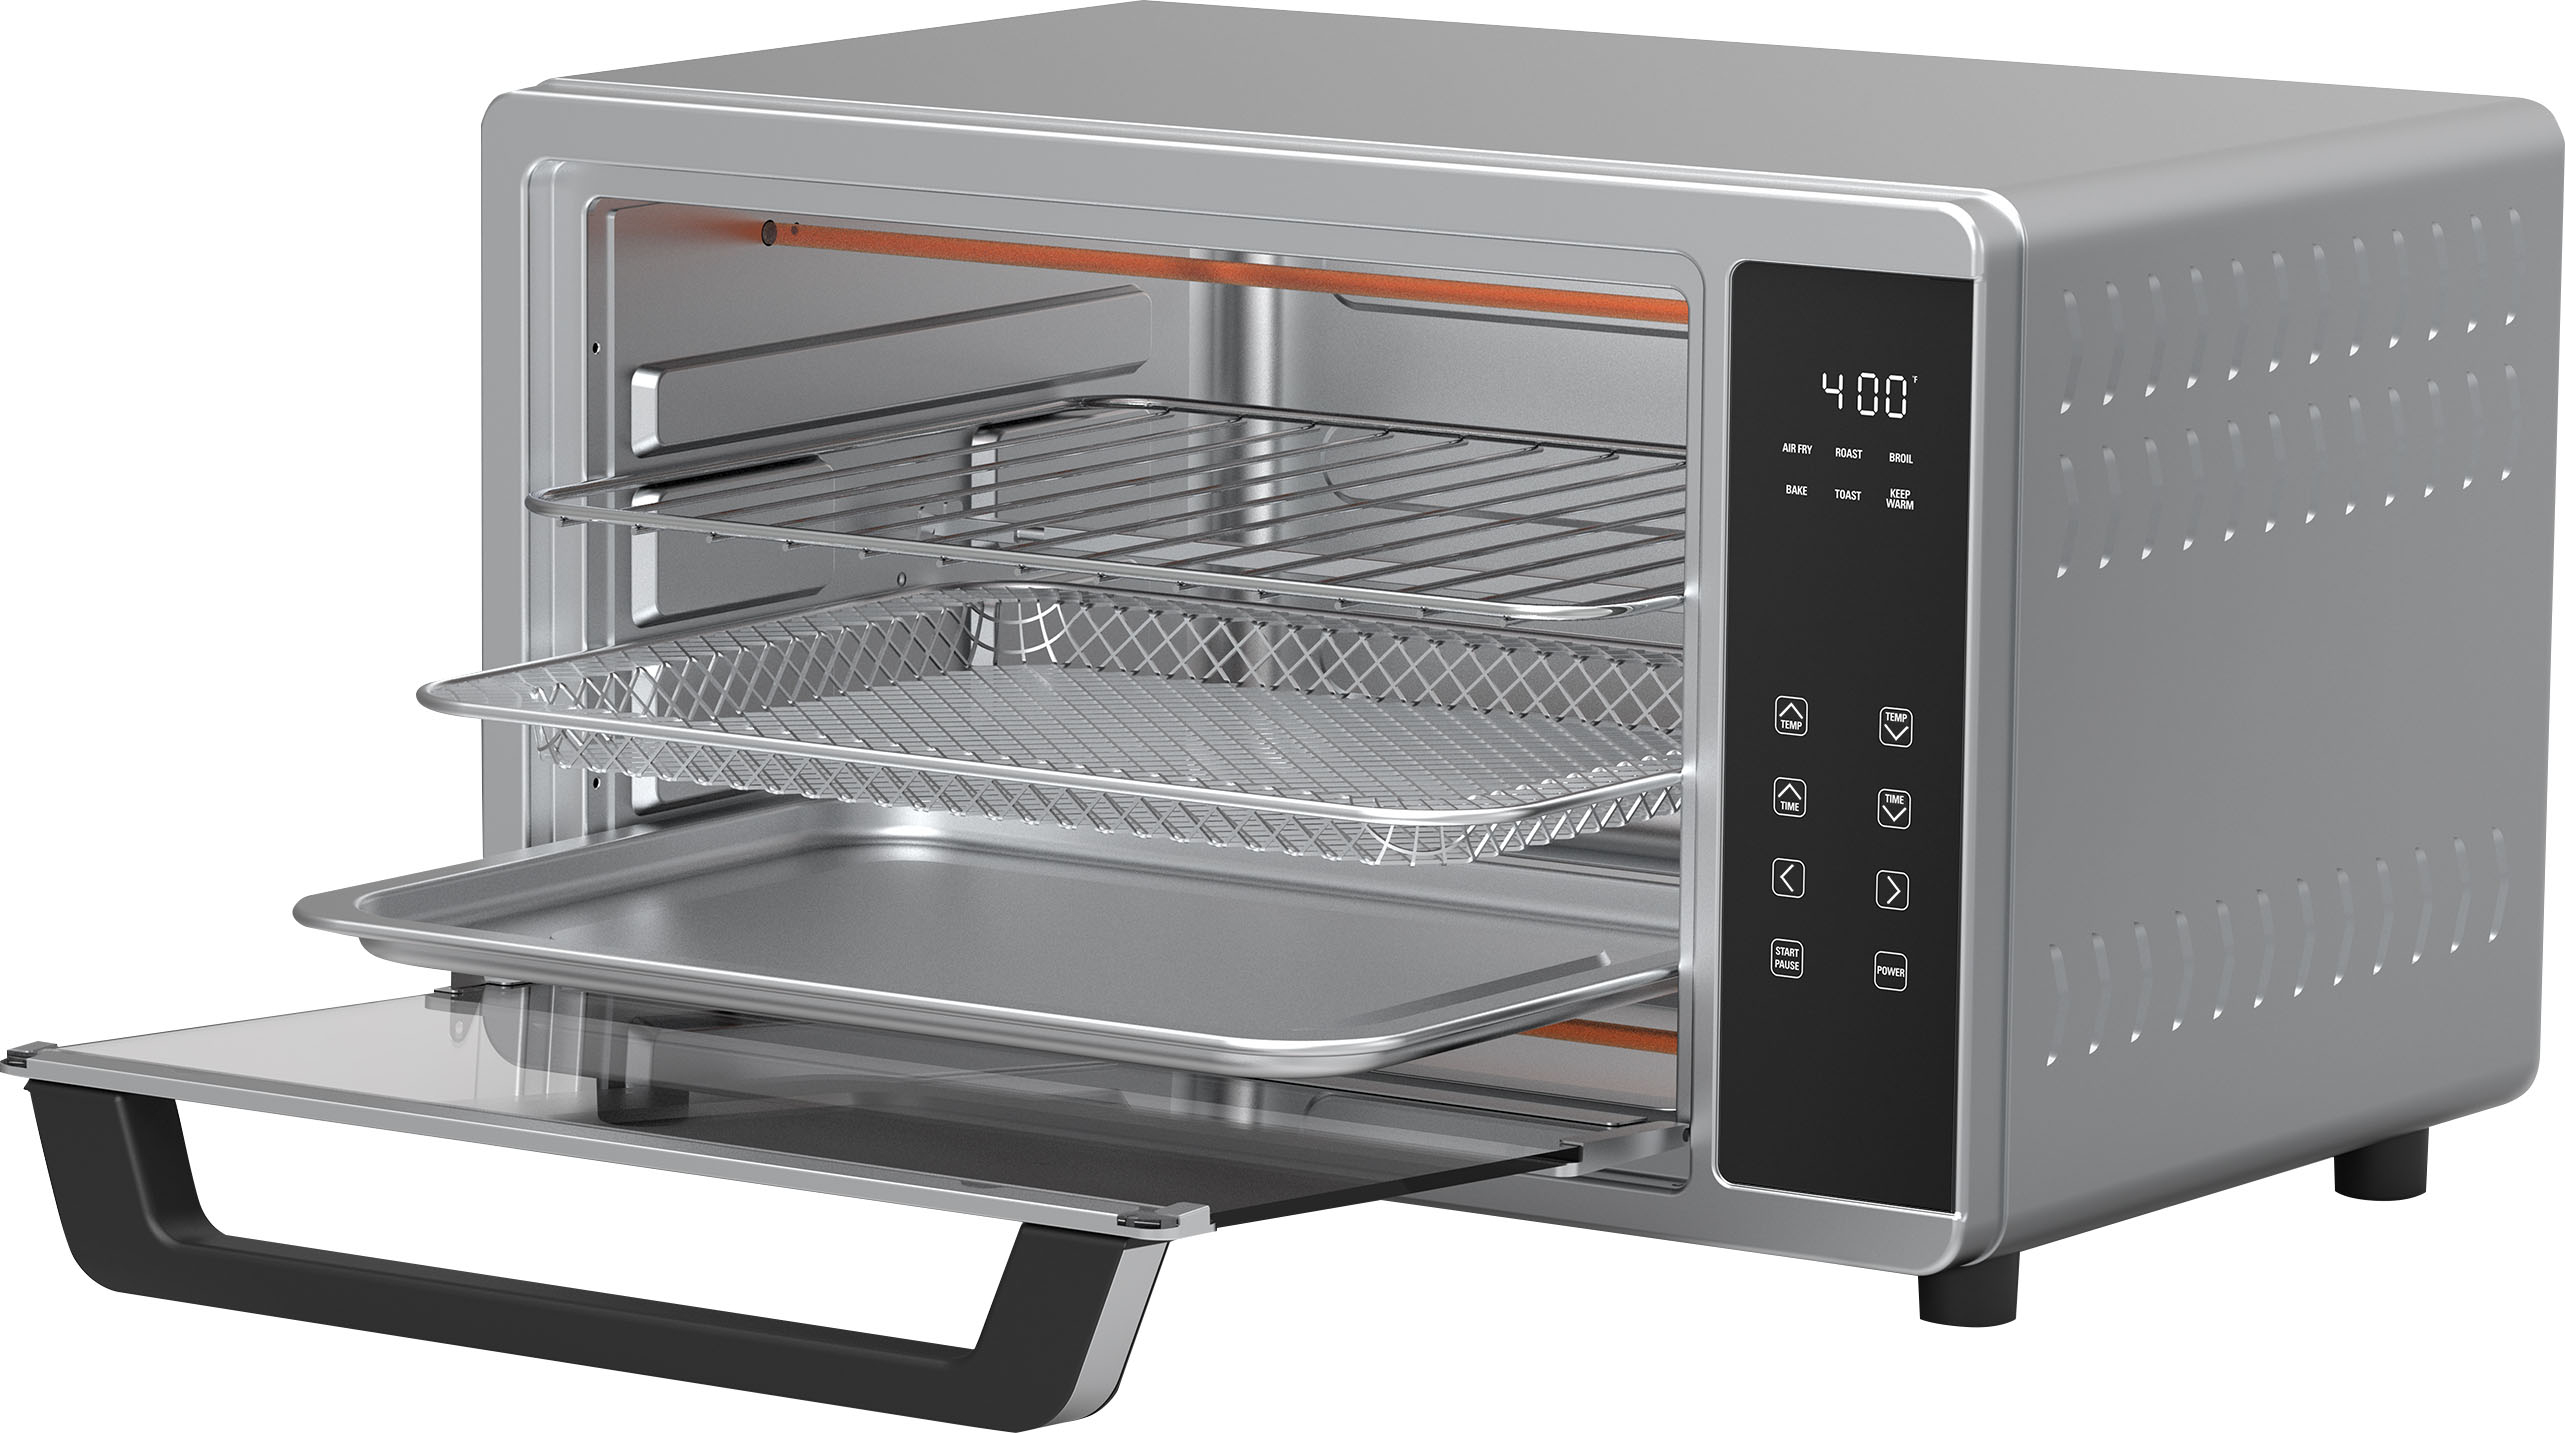 Rent to Own Bella Bella Pro Series - 12-in-1 6-Slice Toaster Oven